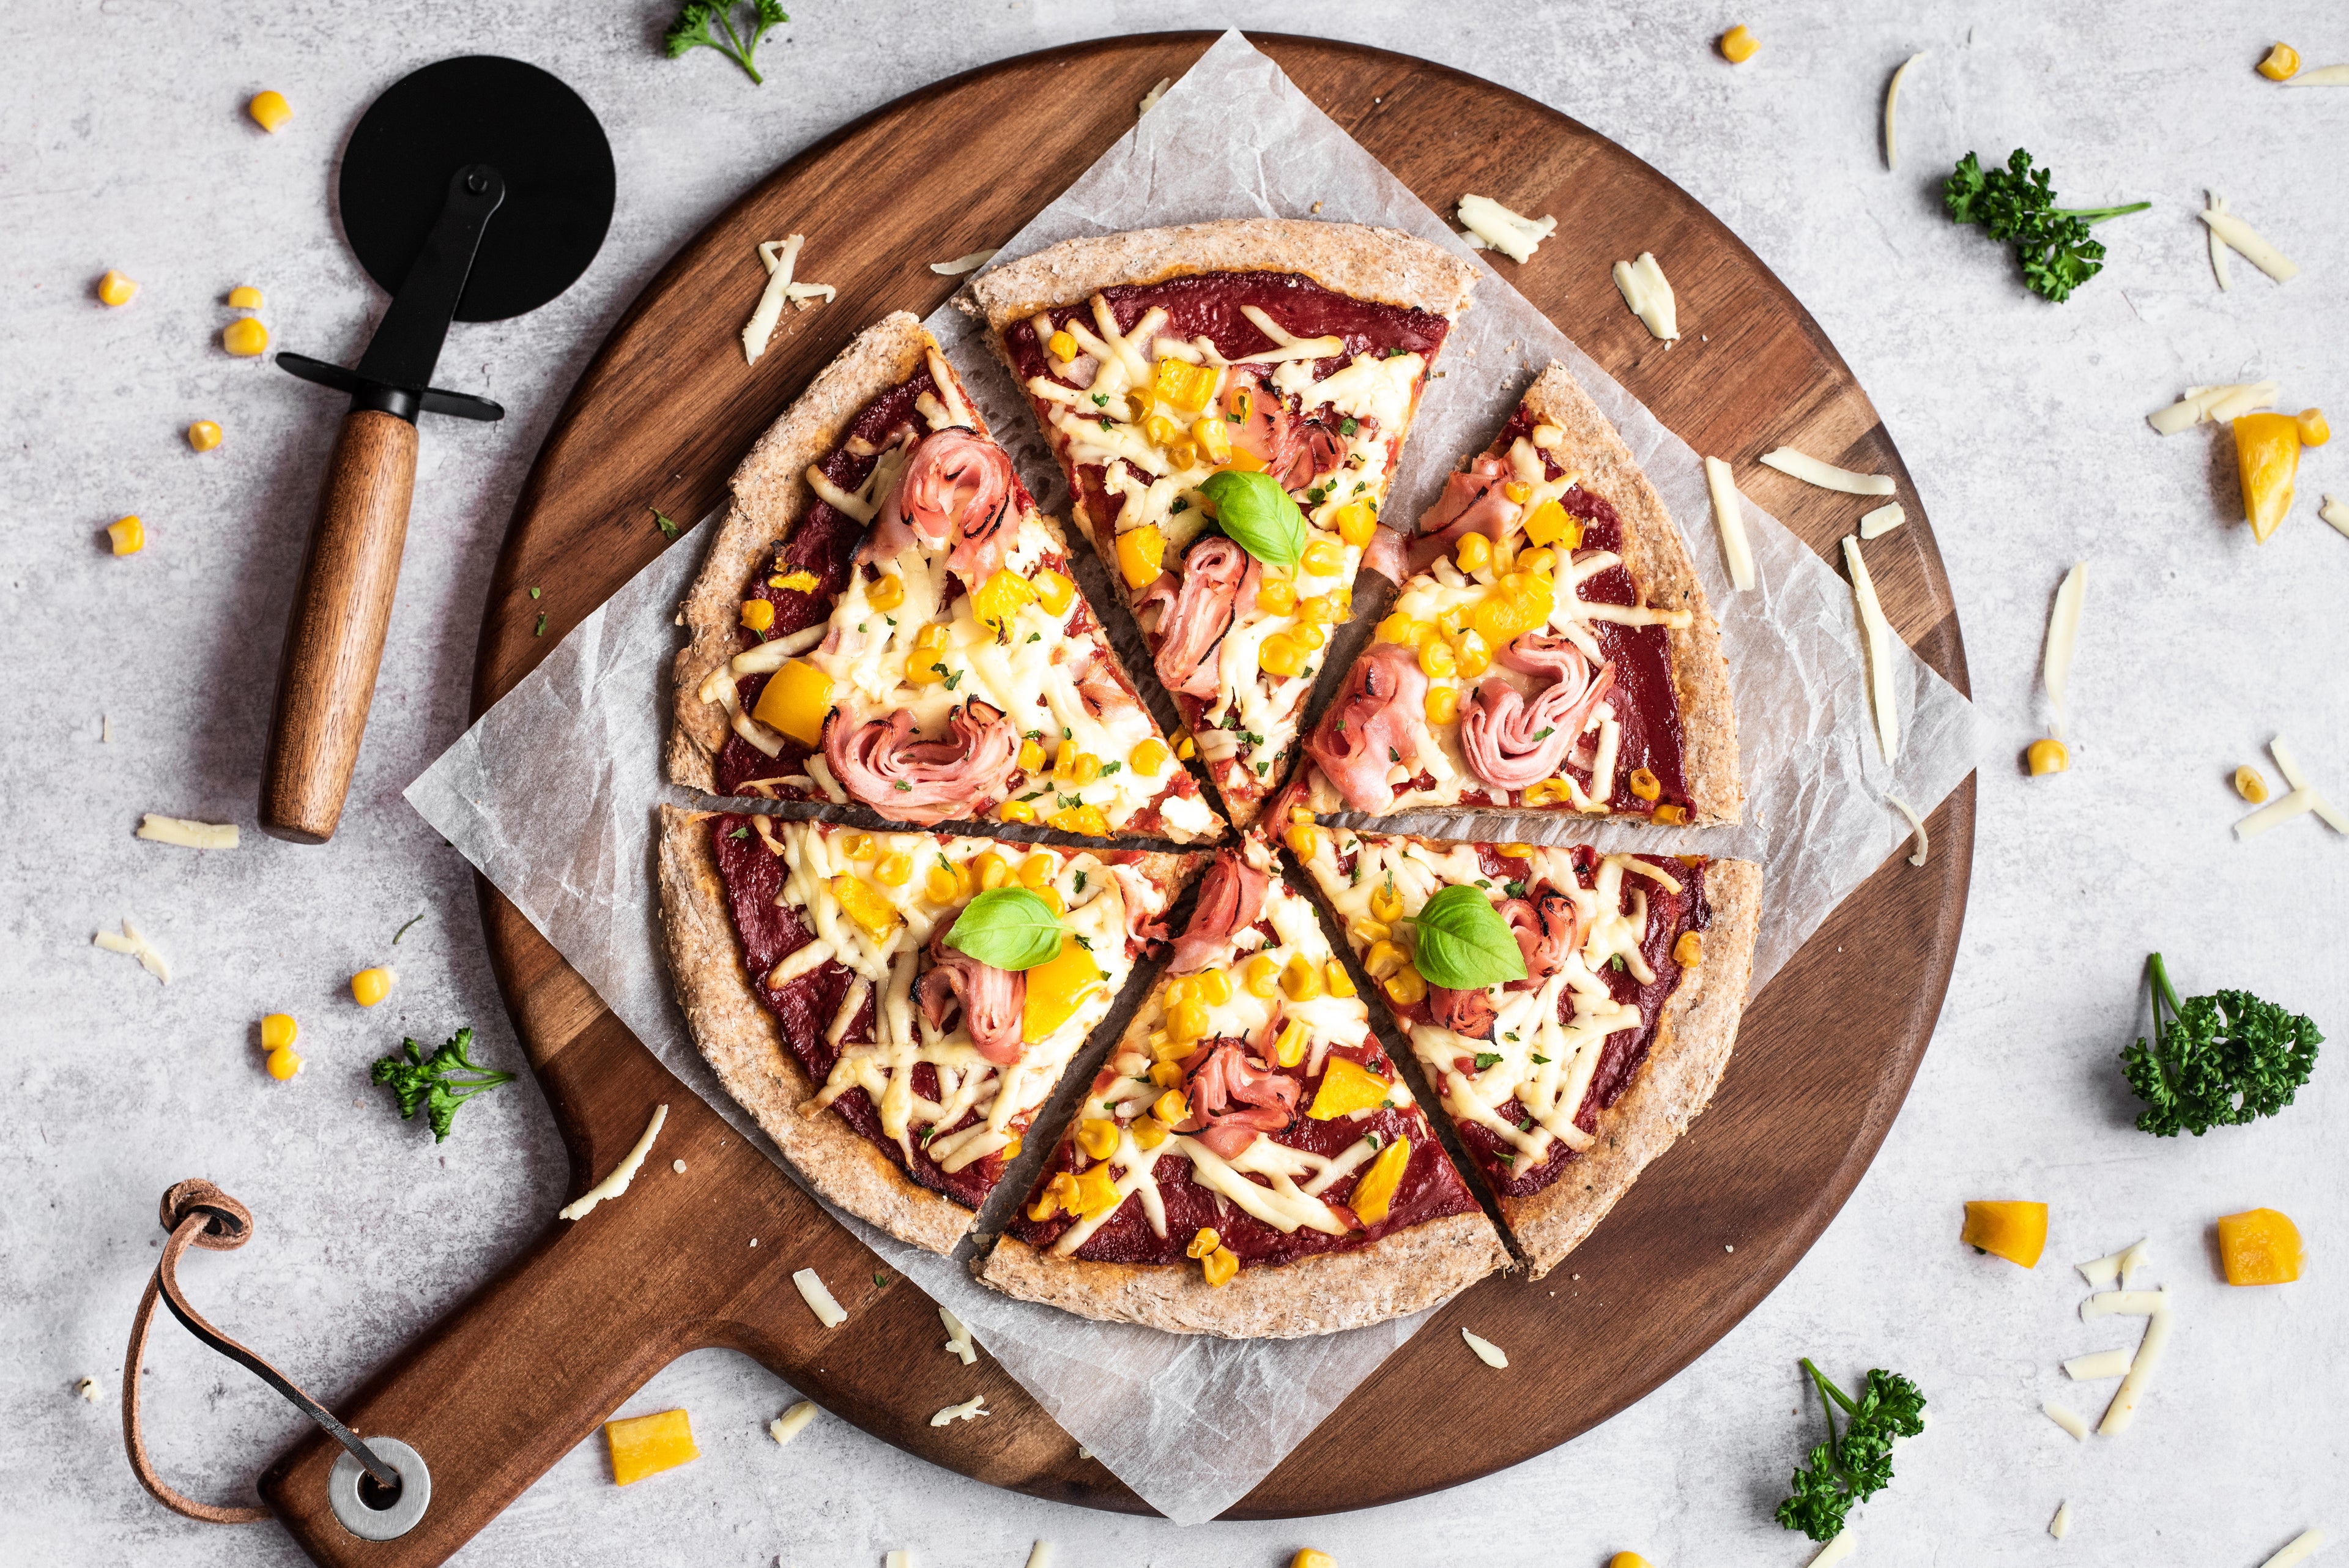 Overhead shot of pizza on chopping board with 6 slices cut and a pizza cutter